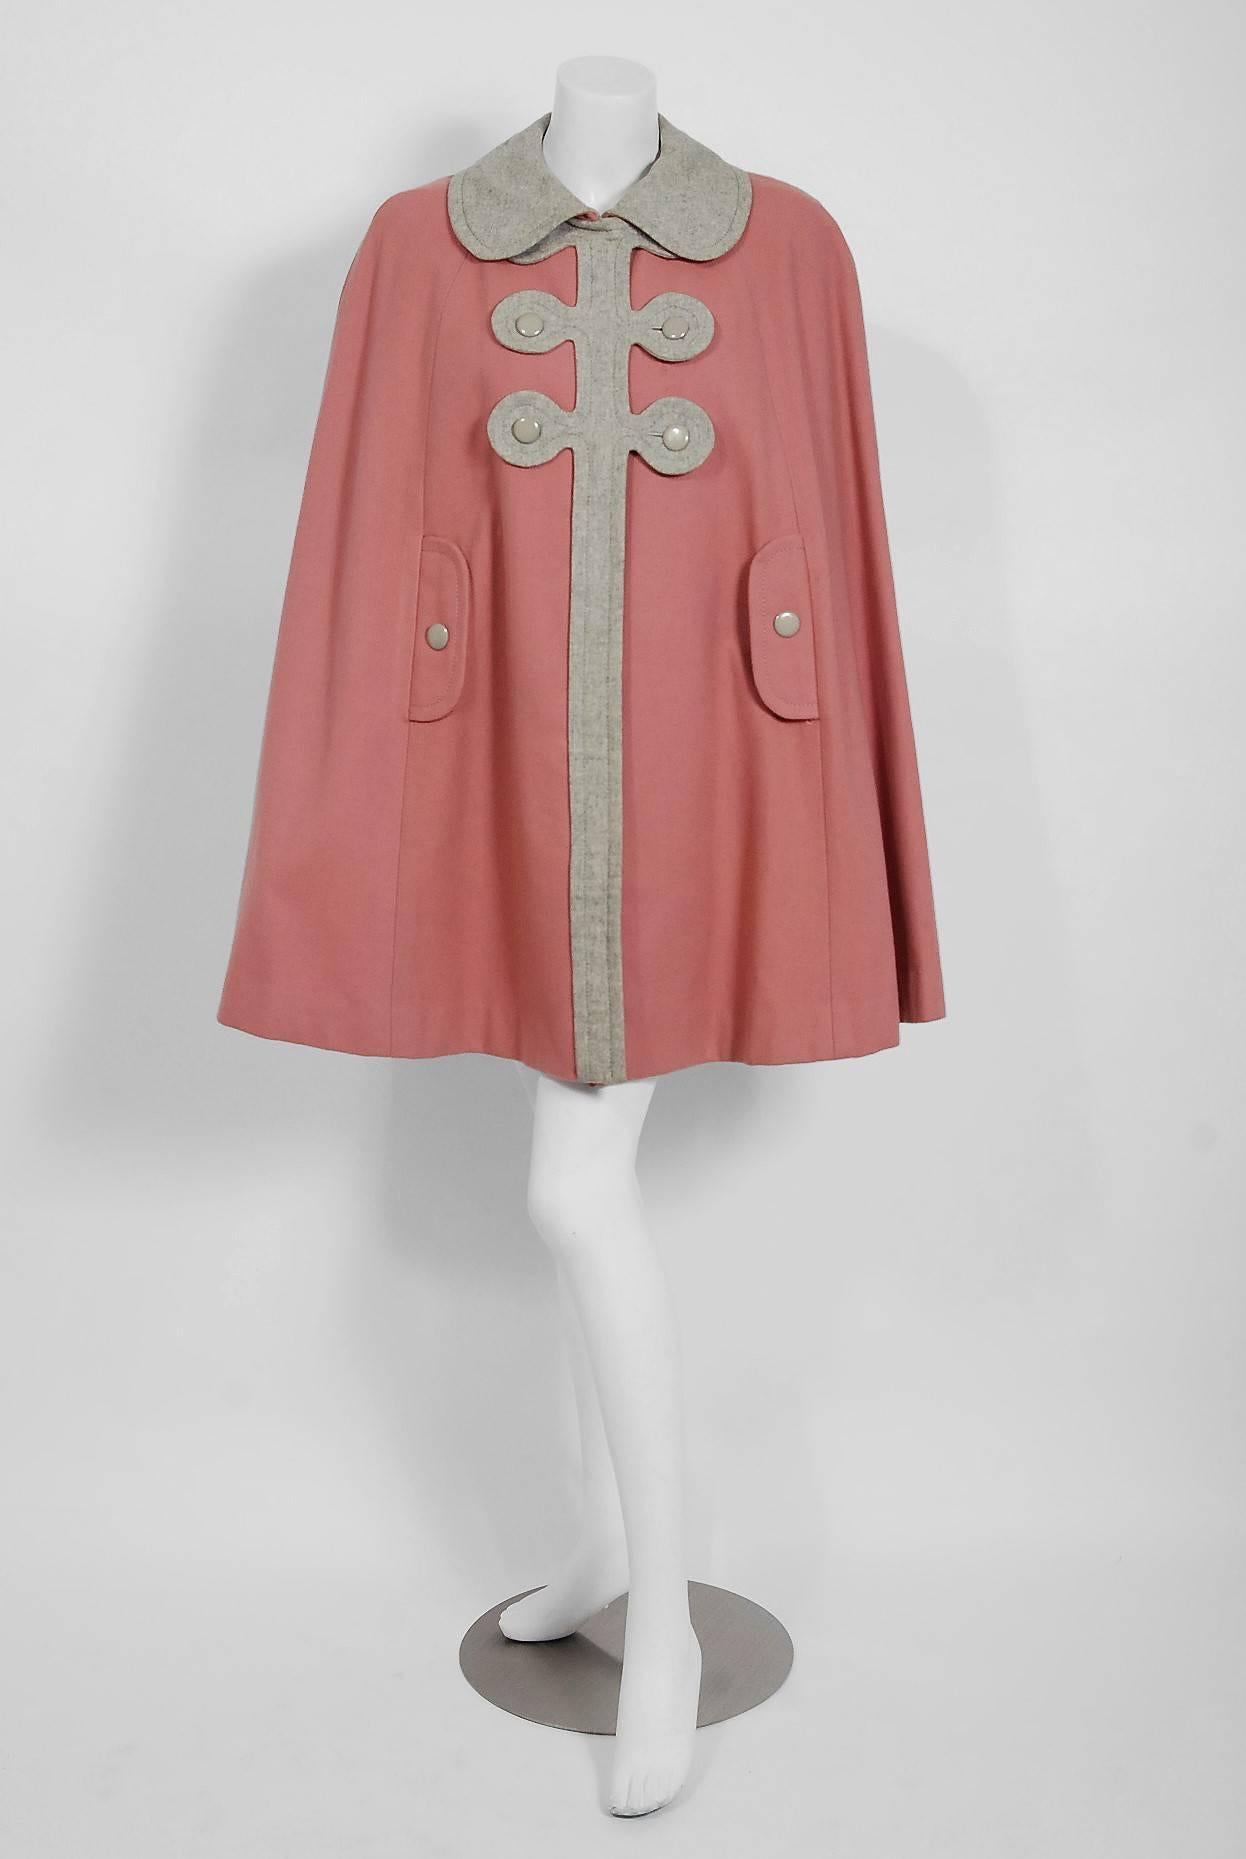 Breathtaking Pierre Cardin Paris designer cape in a unique mauve-pink and gray color combination. In 1951 Cardin opened his own couture house and by 1957, he started a ready-to-wear line; a bold move for a French couturier at the time. The look most